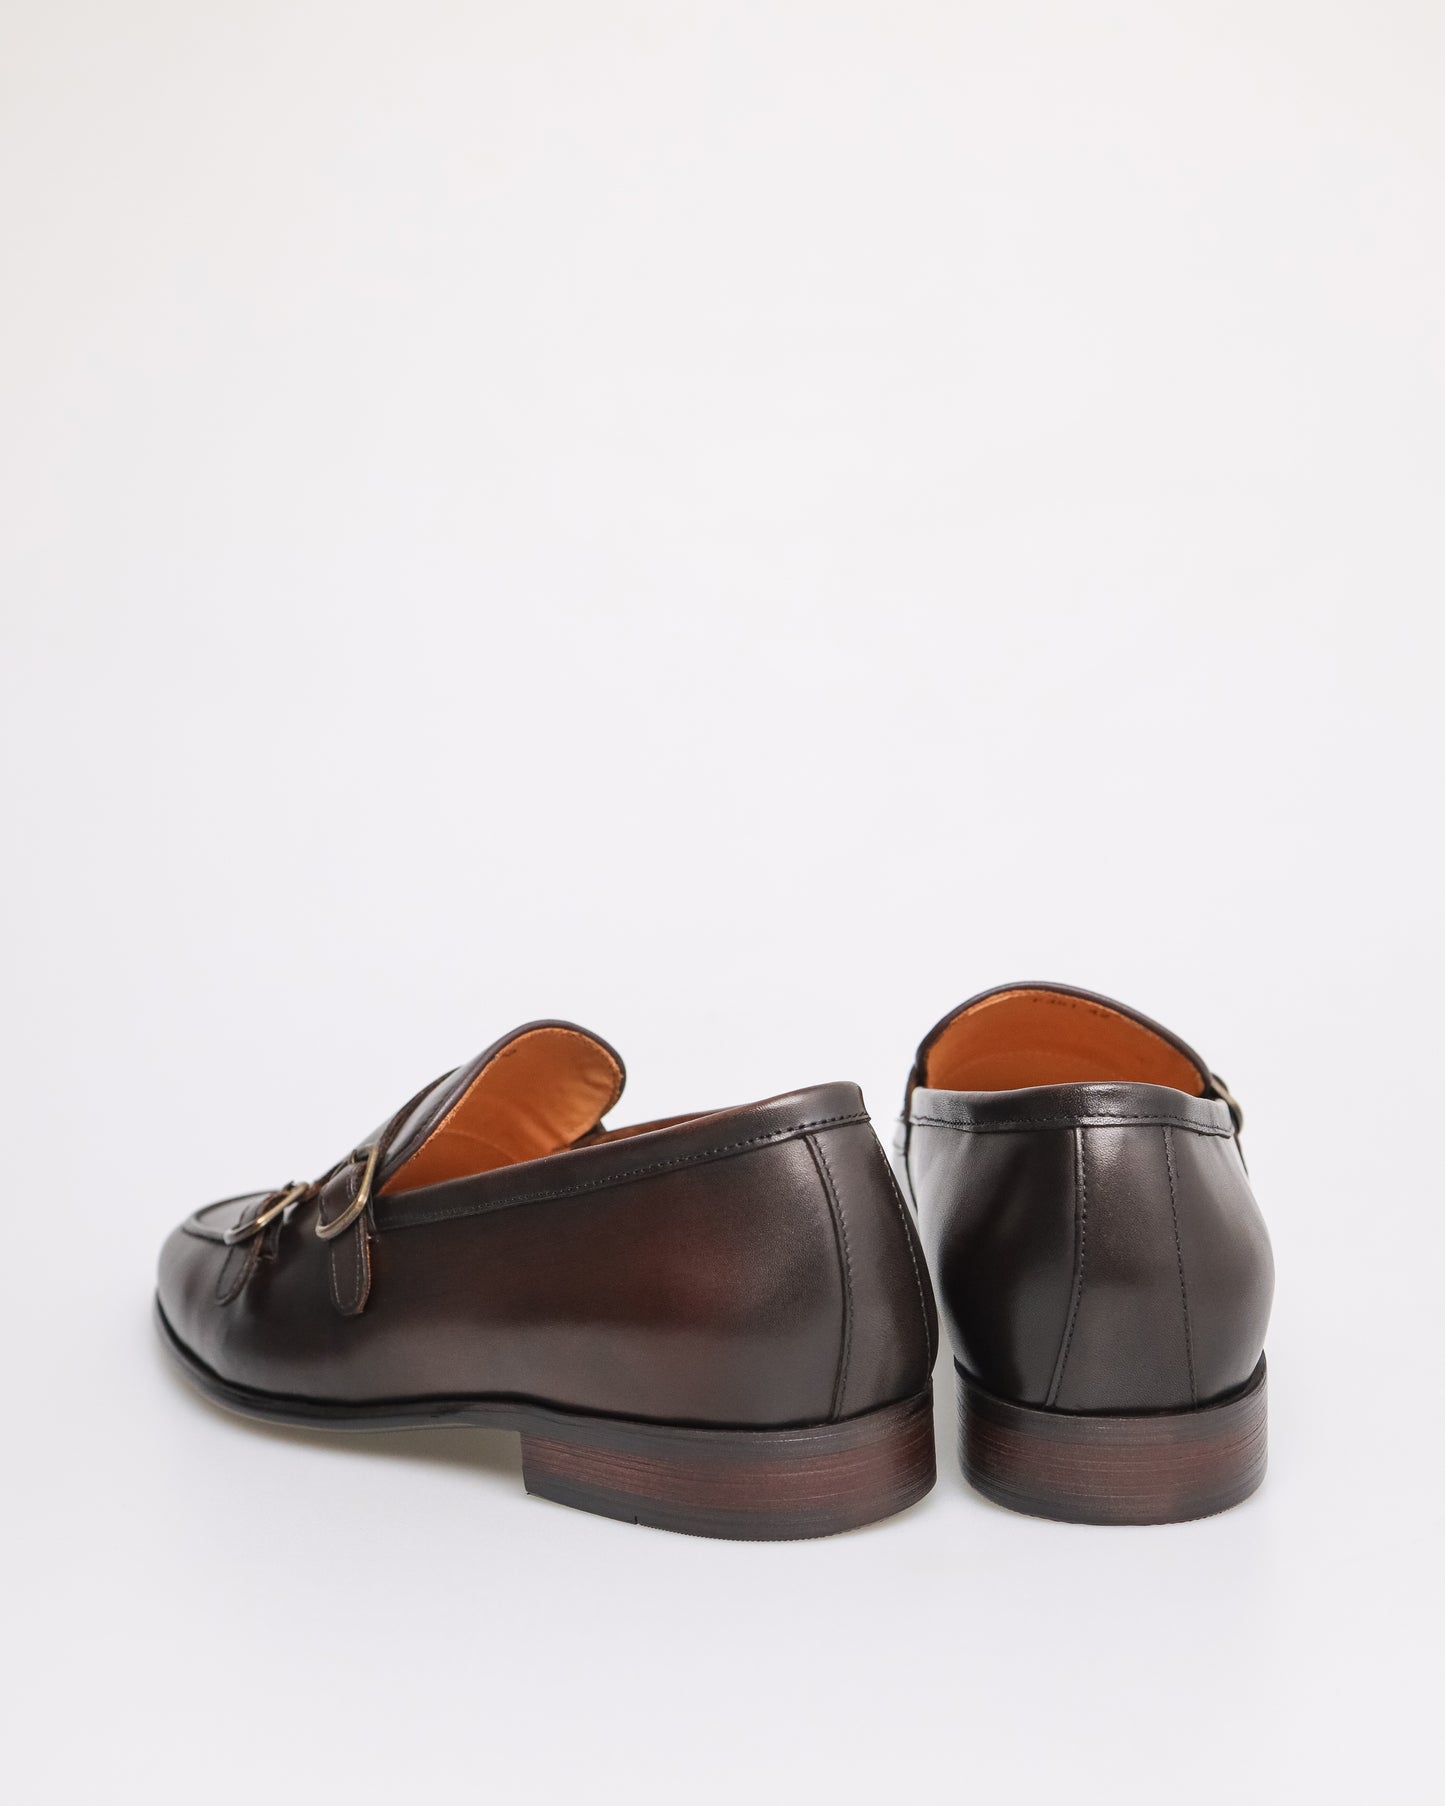 Tomaz F351 Men's Double Monk Strap Loafers (Coffee)